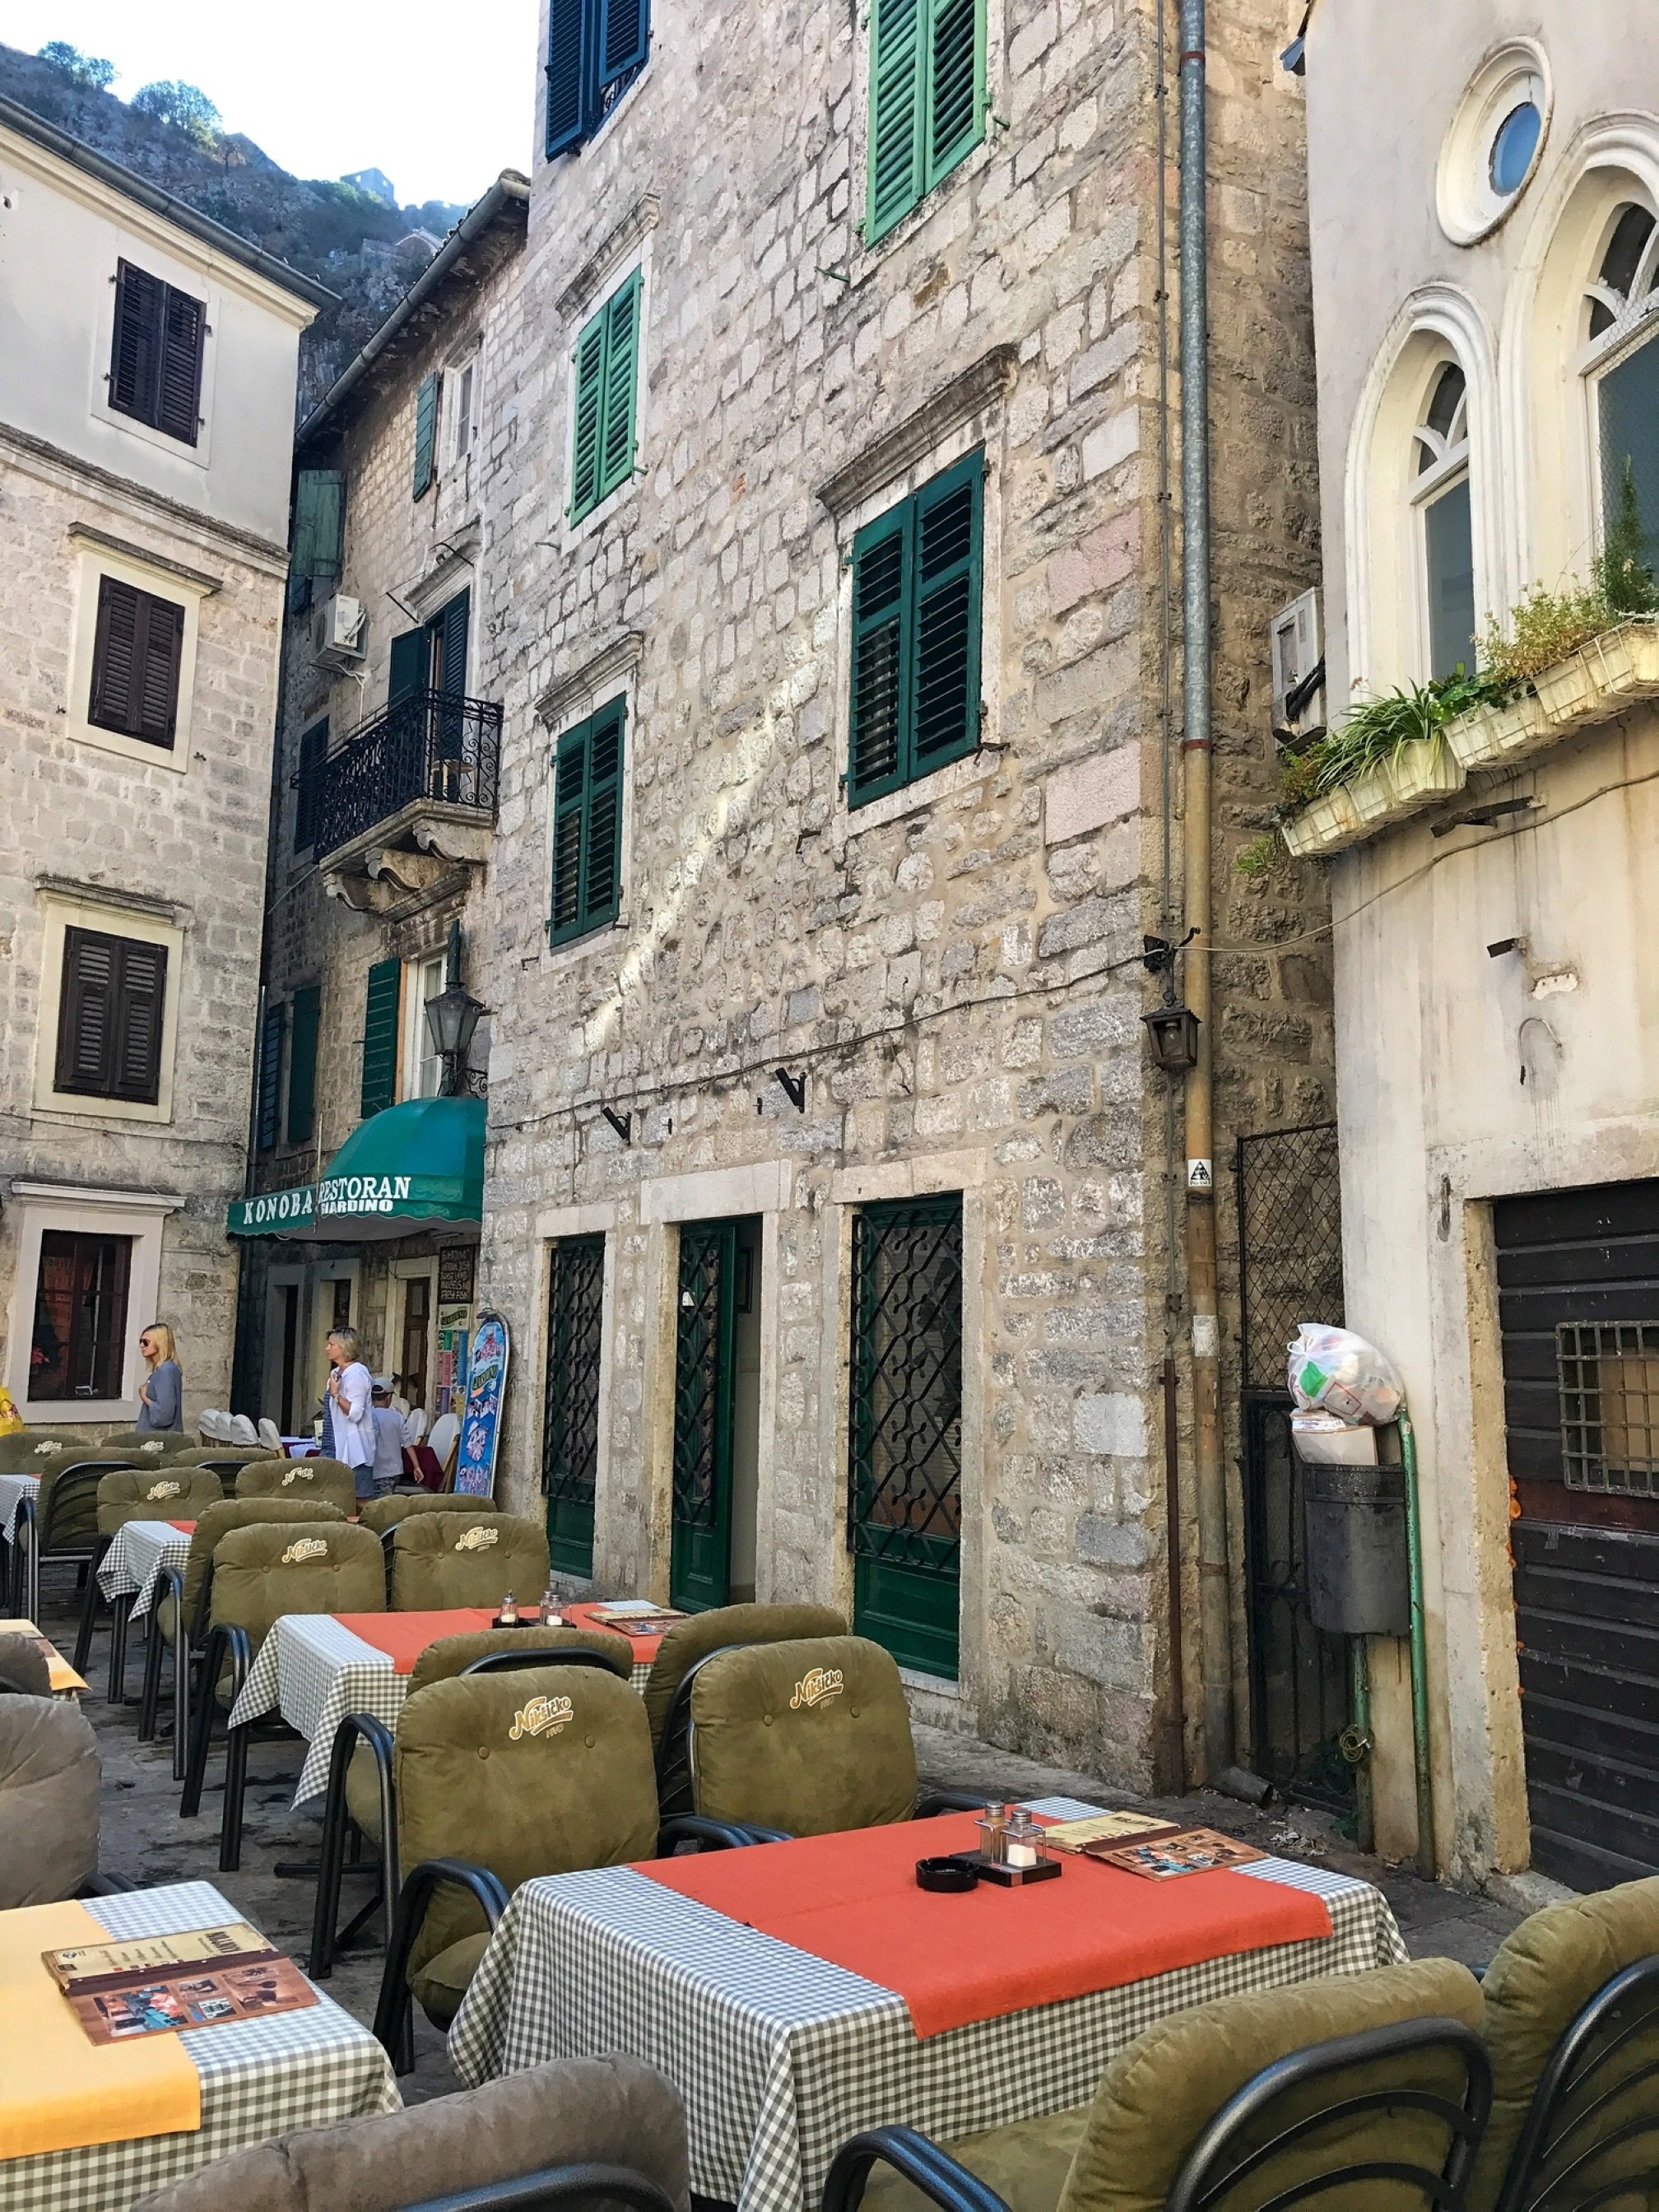 The old town in the city of Kotor, Montenegro. (Photo by Özge Şengelen)